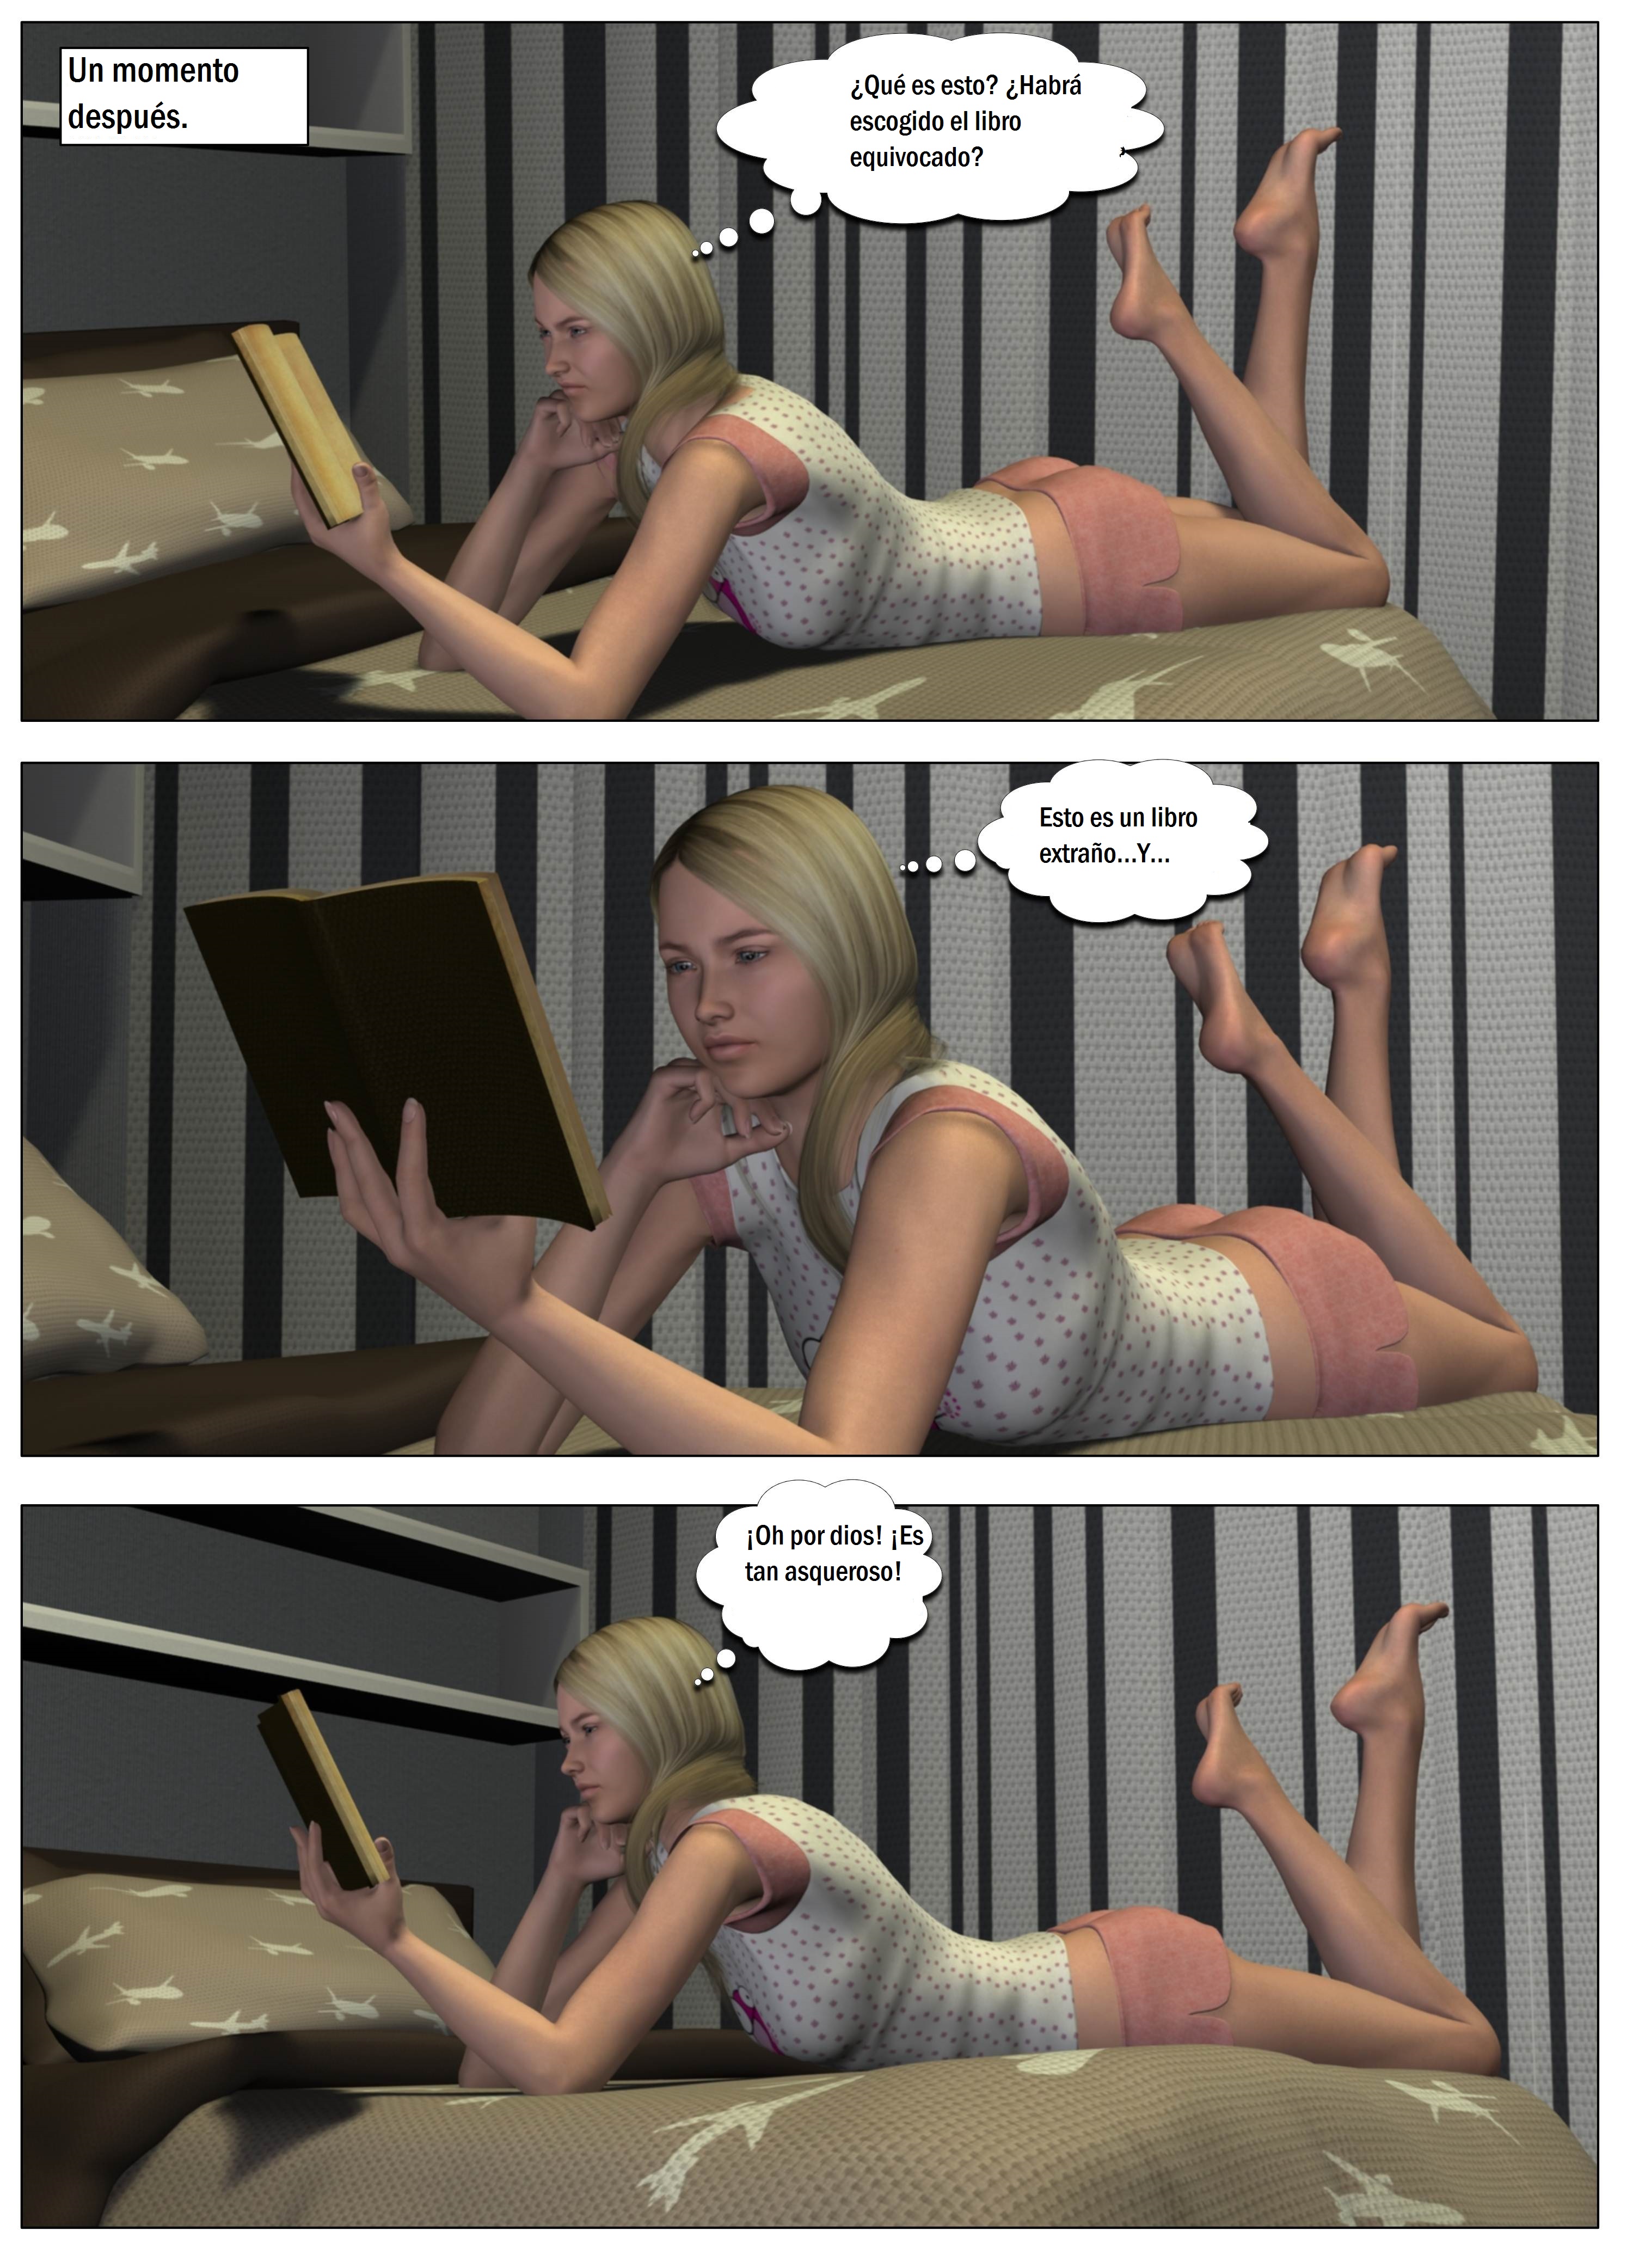 Galford9 Evil Queen Spanish 3D Porn Comic